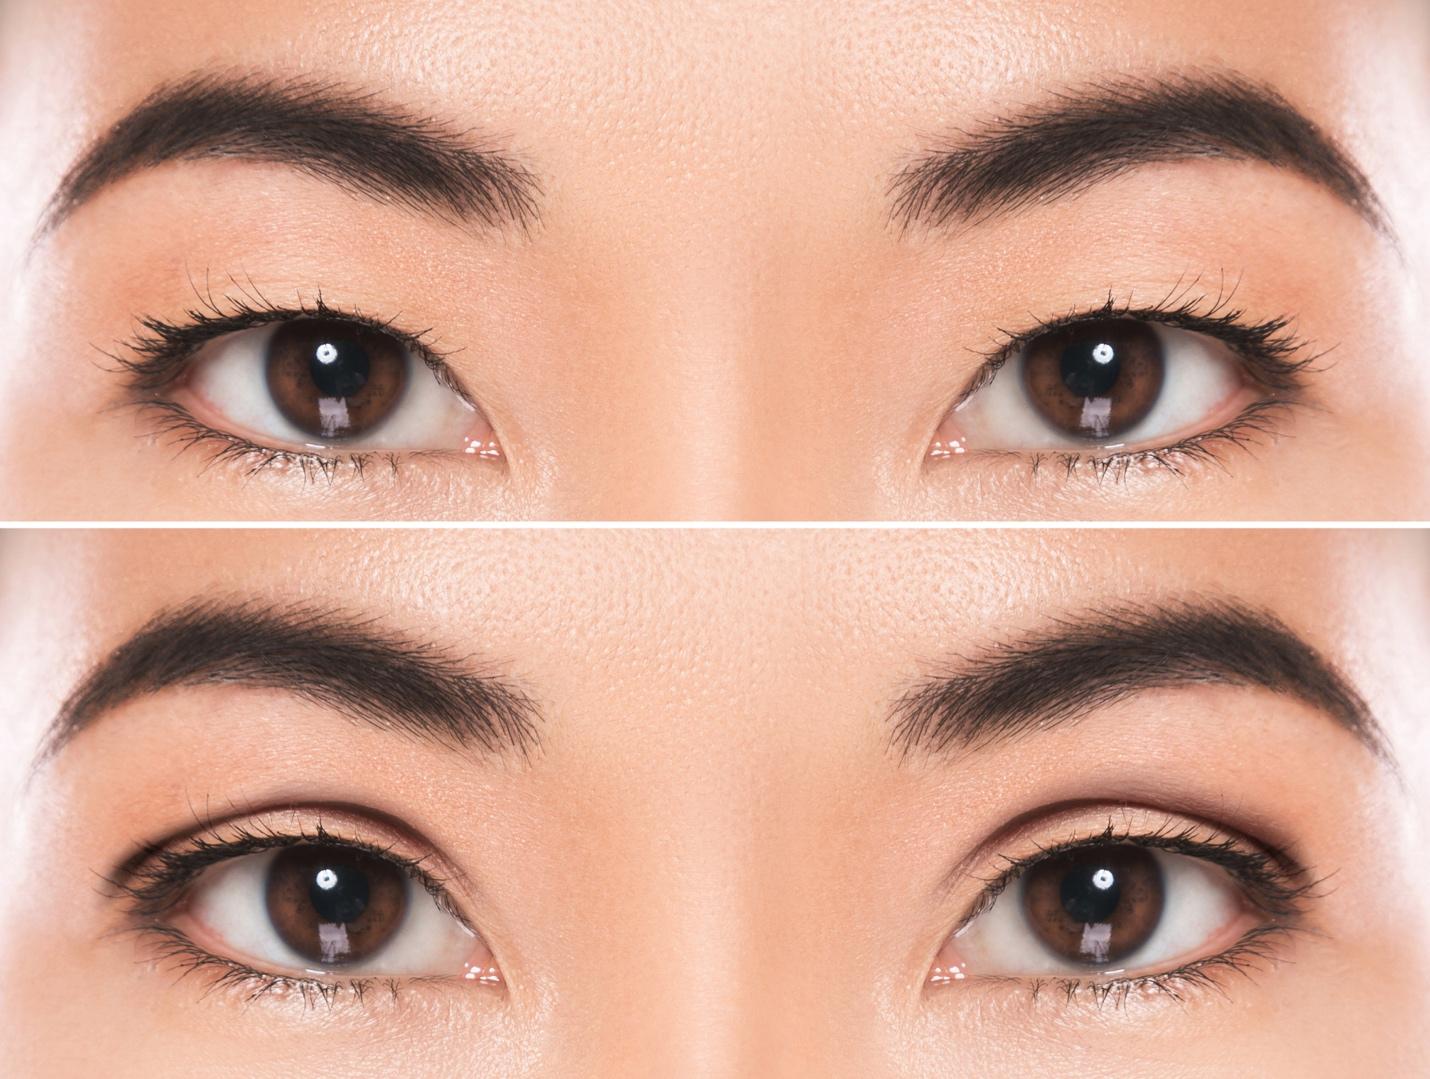 A brow lift or eyelid lift in men and women can open up the eyes and revitalize your appearance